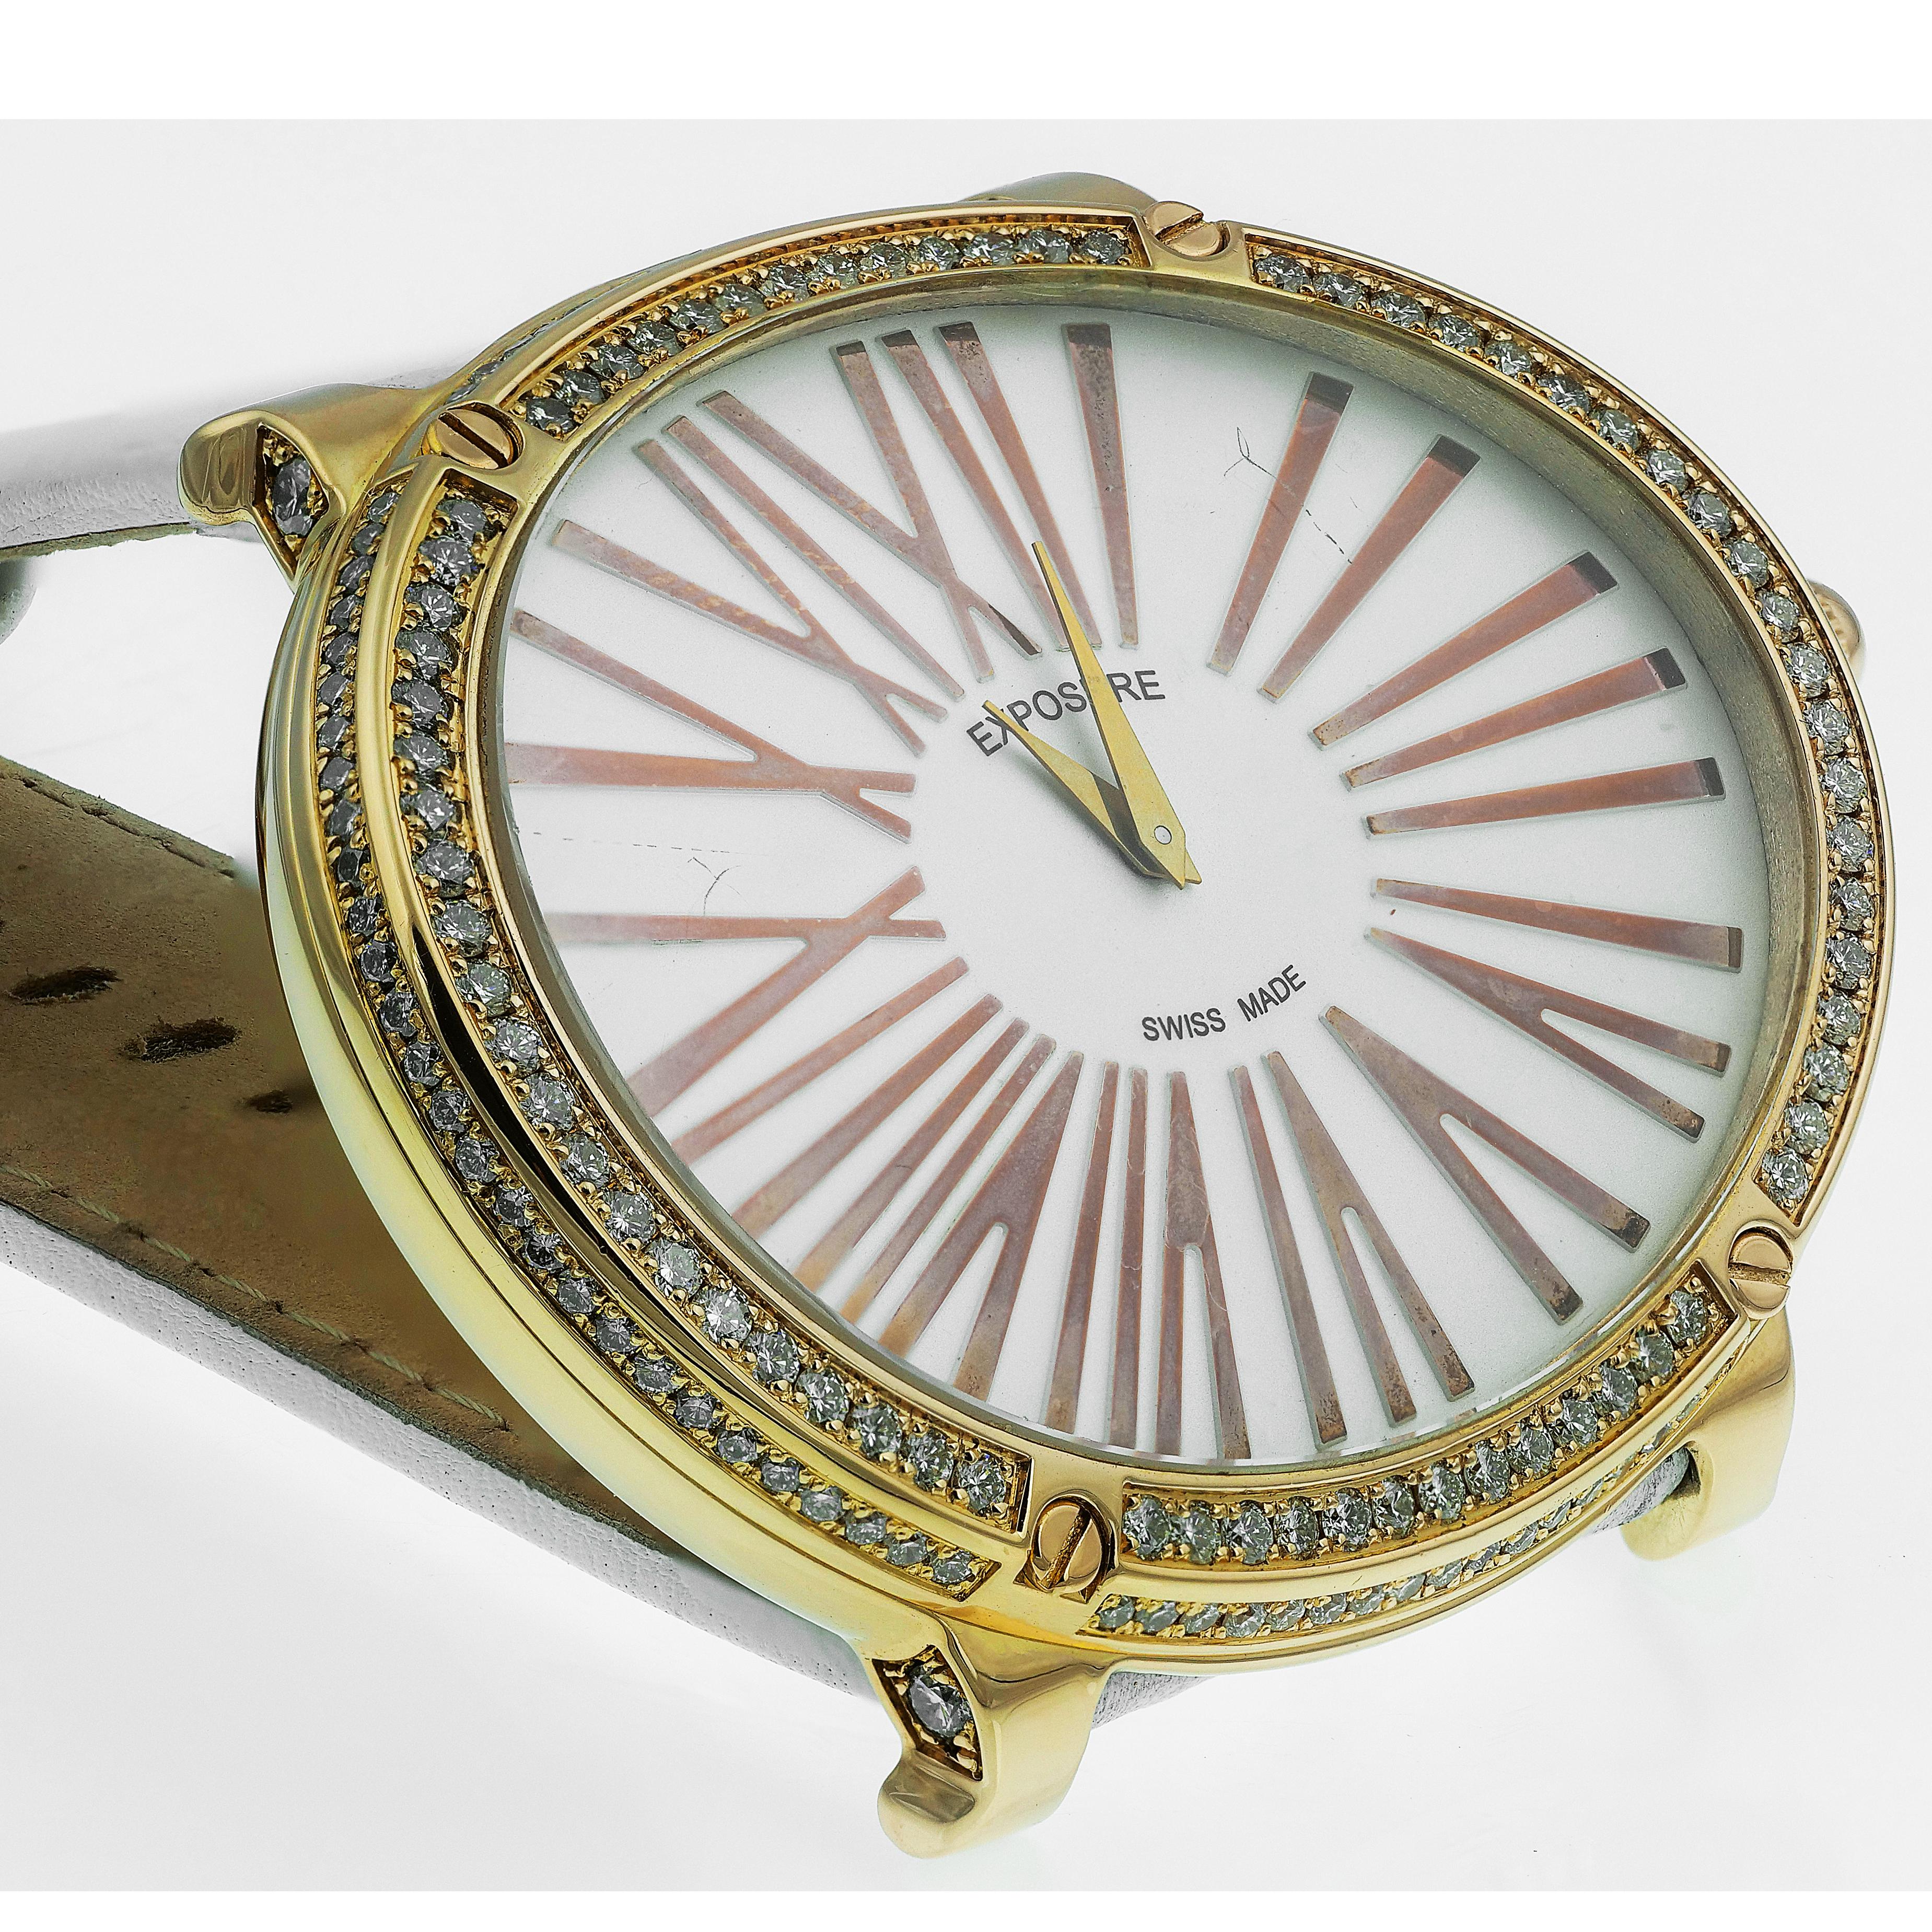 Stunning Exposure watch with a white diald, bold large roman numerals in gold with quartz movement. A thick oval gold border embedded with glistening round brilliant cut diamonds. The wide white leather straps compliment the glow of the gold and has